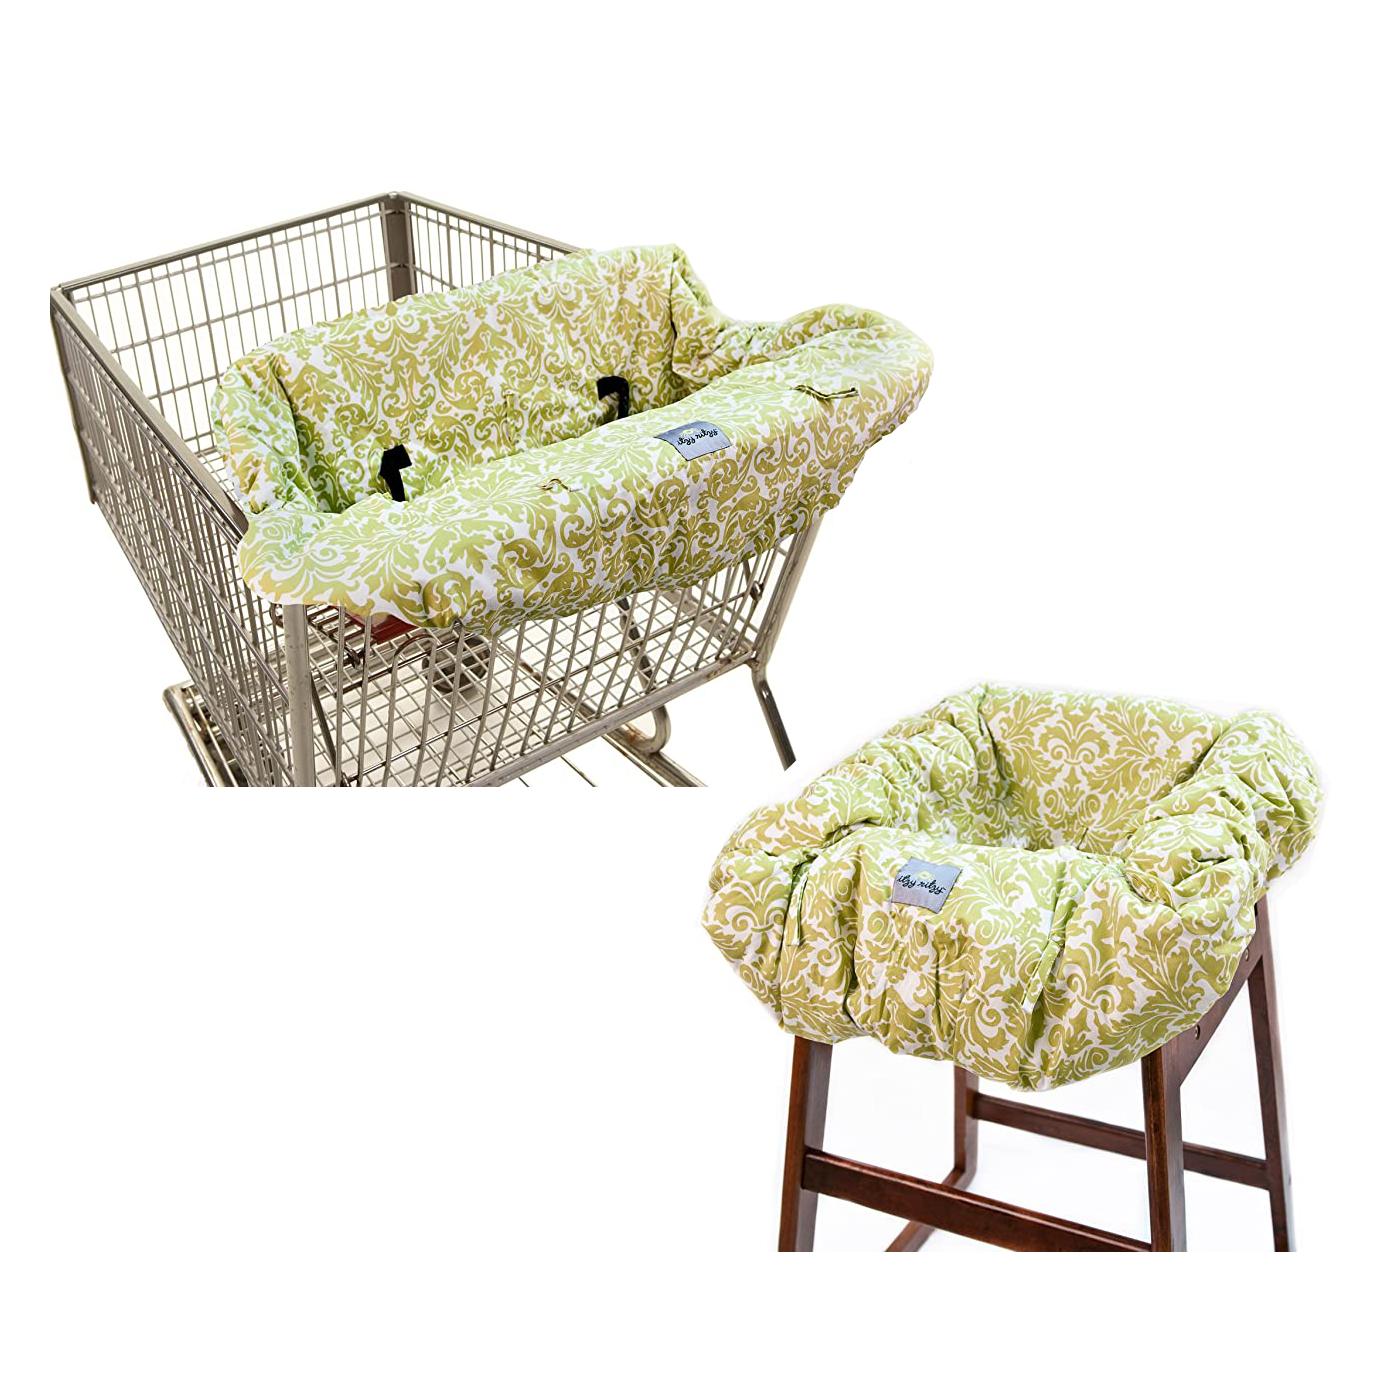 Itzy Ritzy Ritzy Sitzy Shopping Cart and High Chair Cover - Damask Avocado